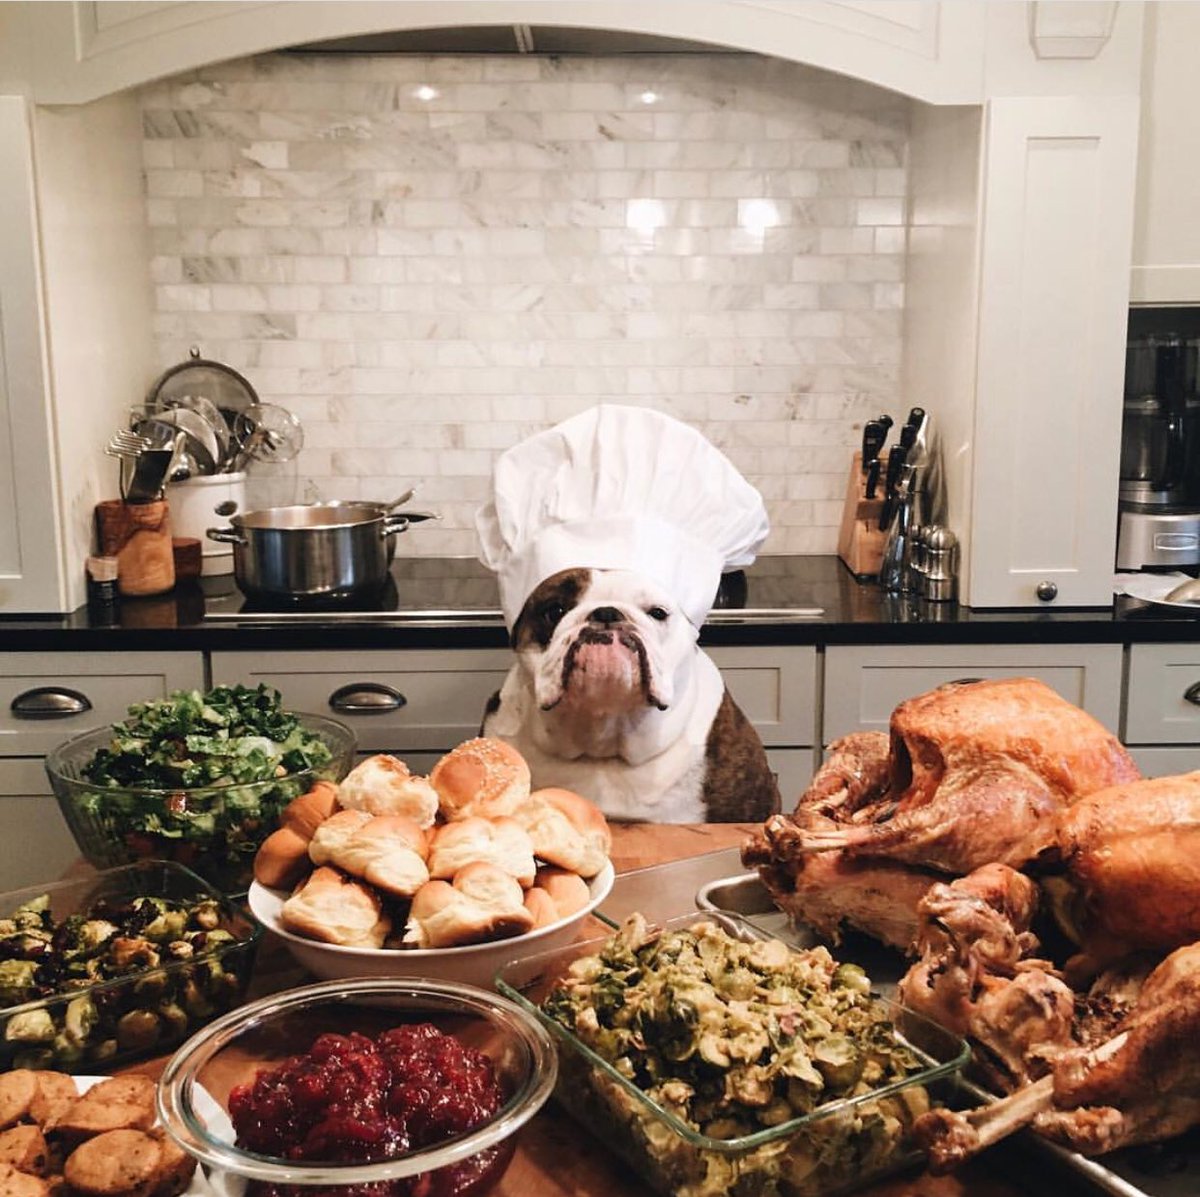 If my #Thanksgiving feast doesn’t look like this tomorrow... I don’t want it. ???? #MabelTheBully https://t.co/Ir6smx46Ou